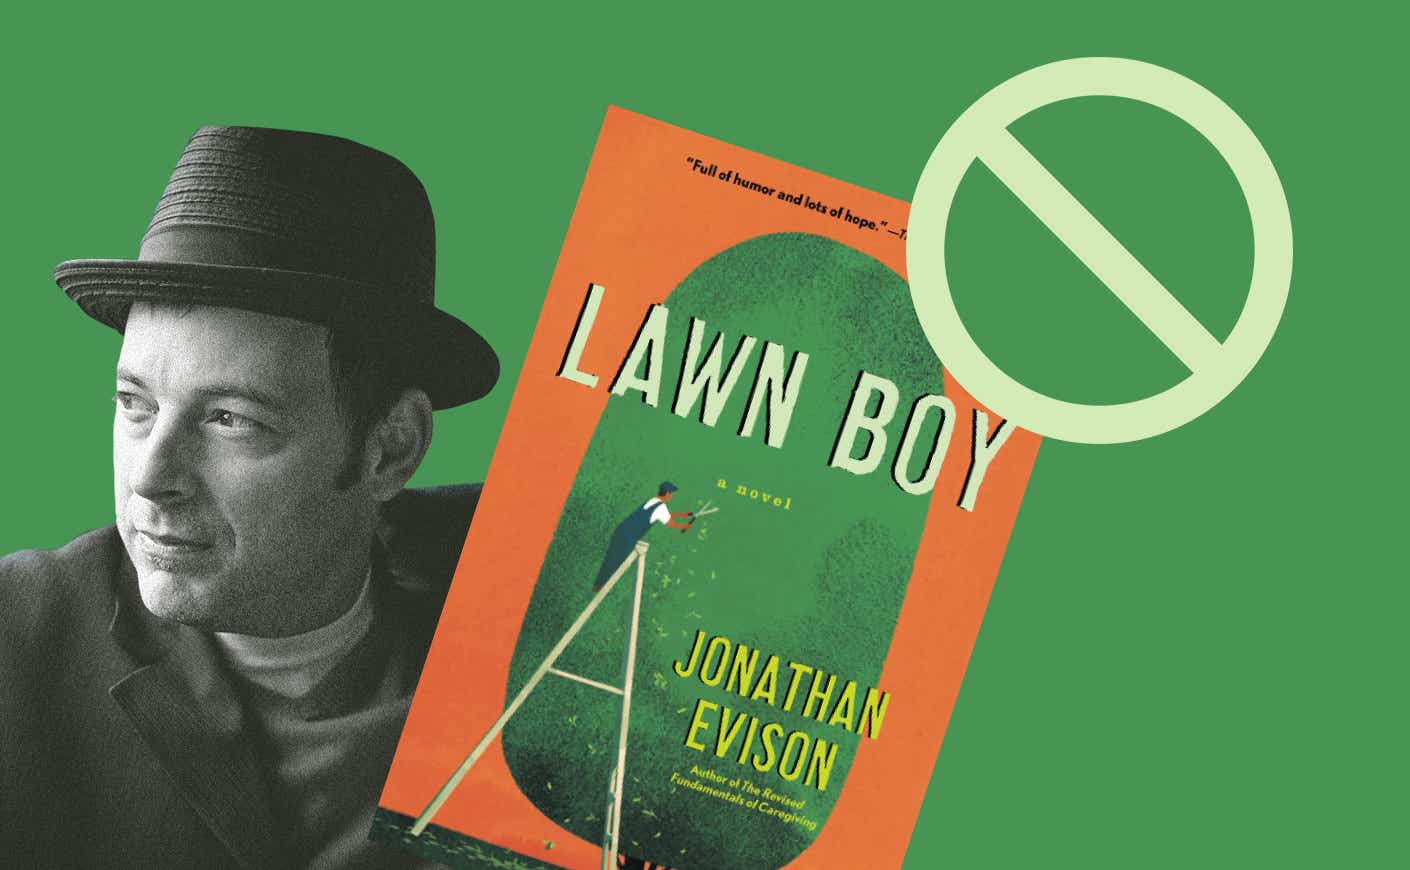 graphic of jonathan evison and his banned book Lawn Boy